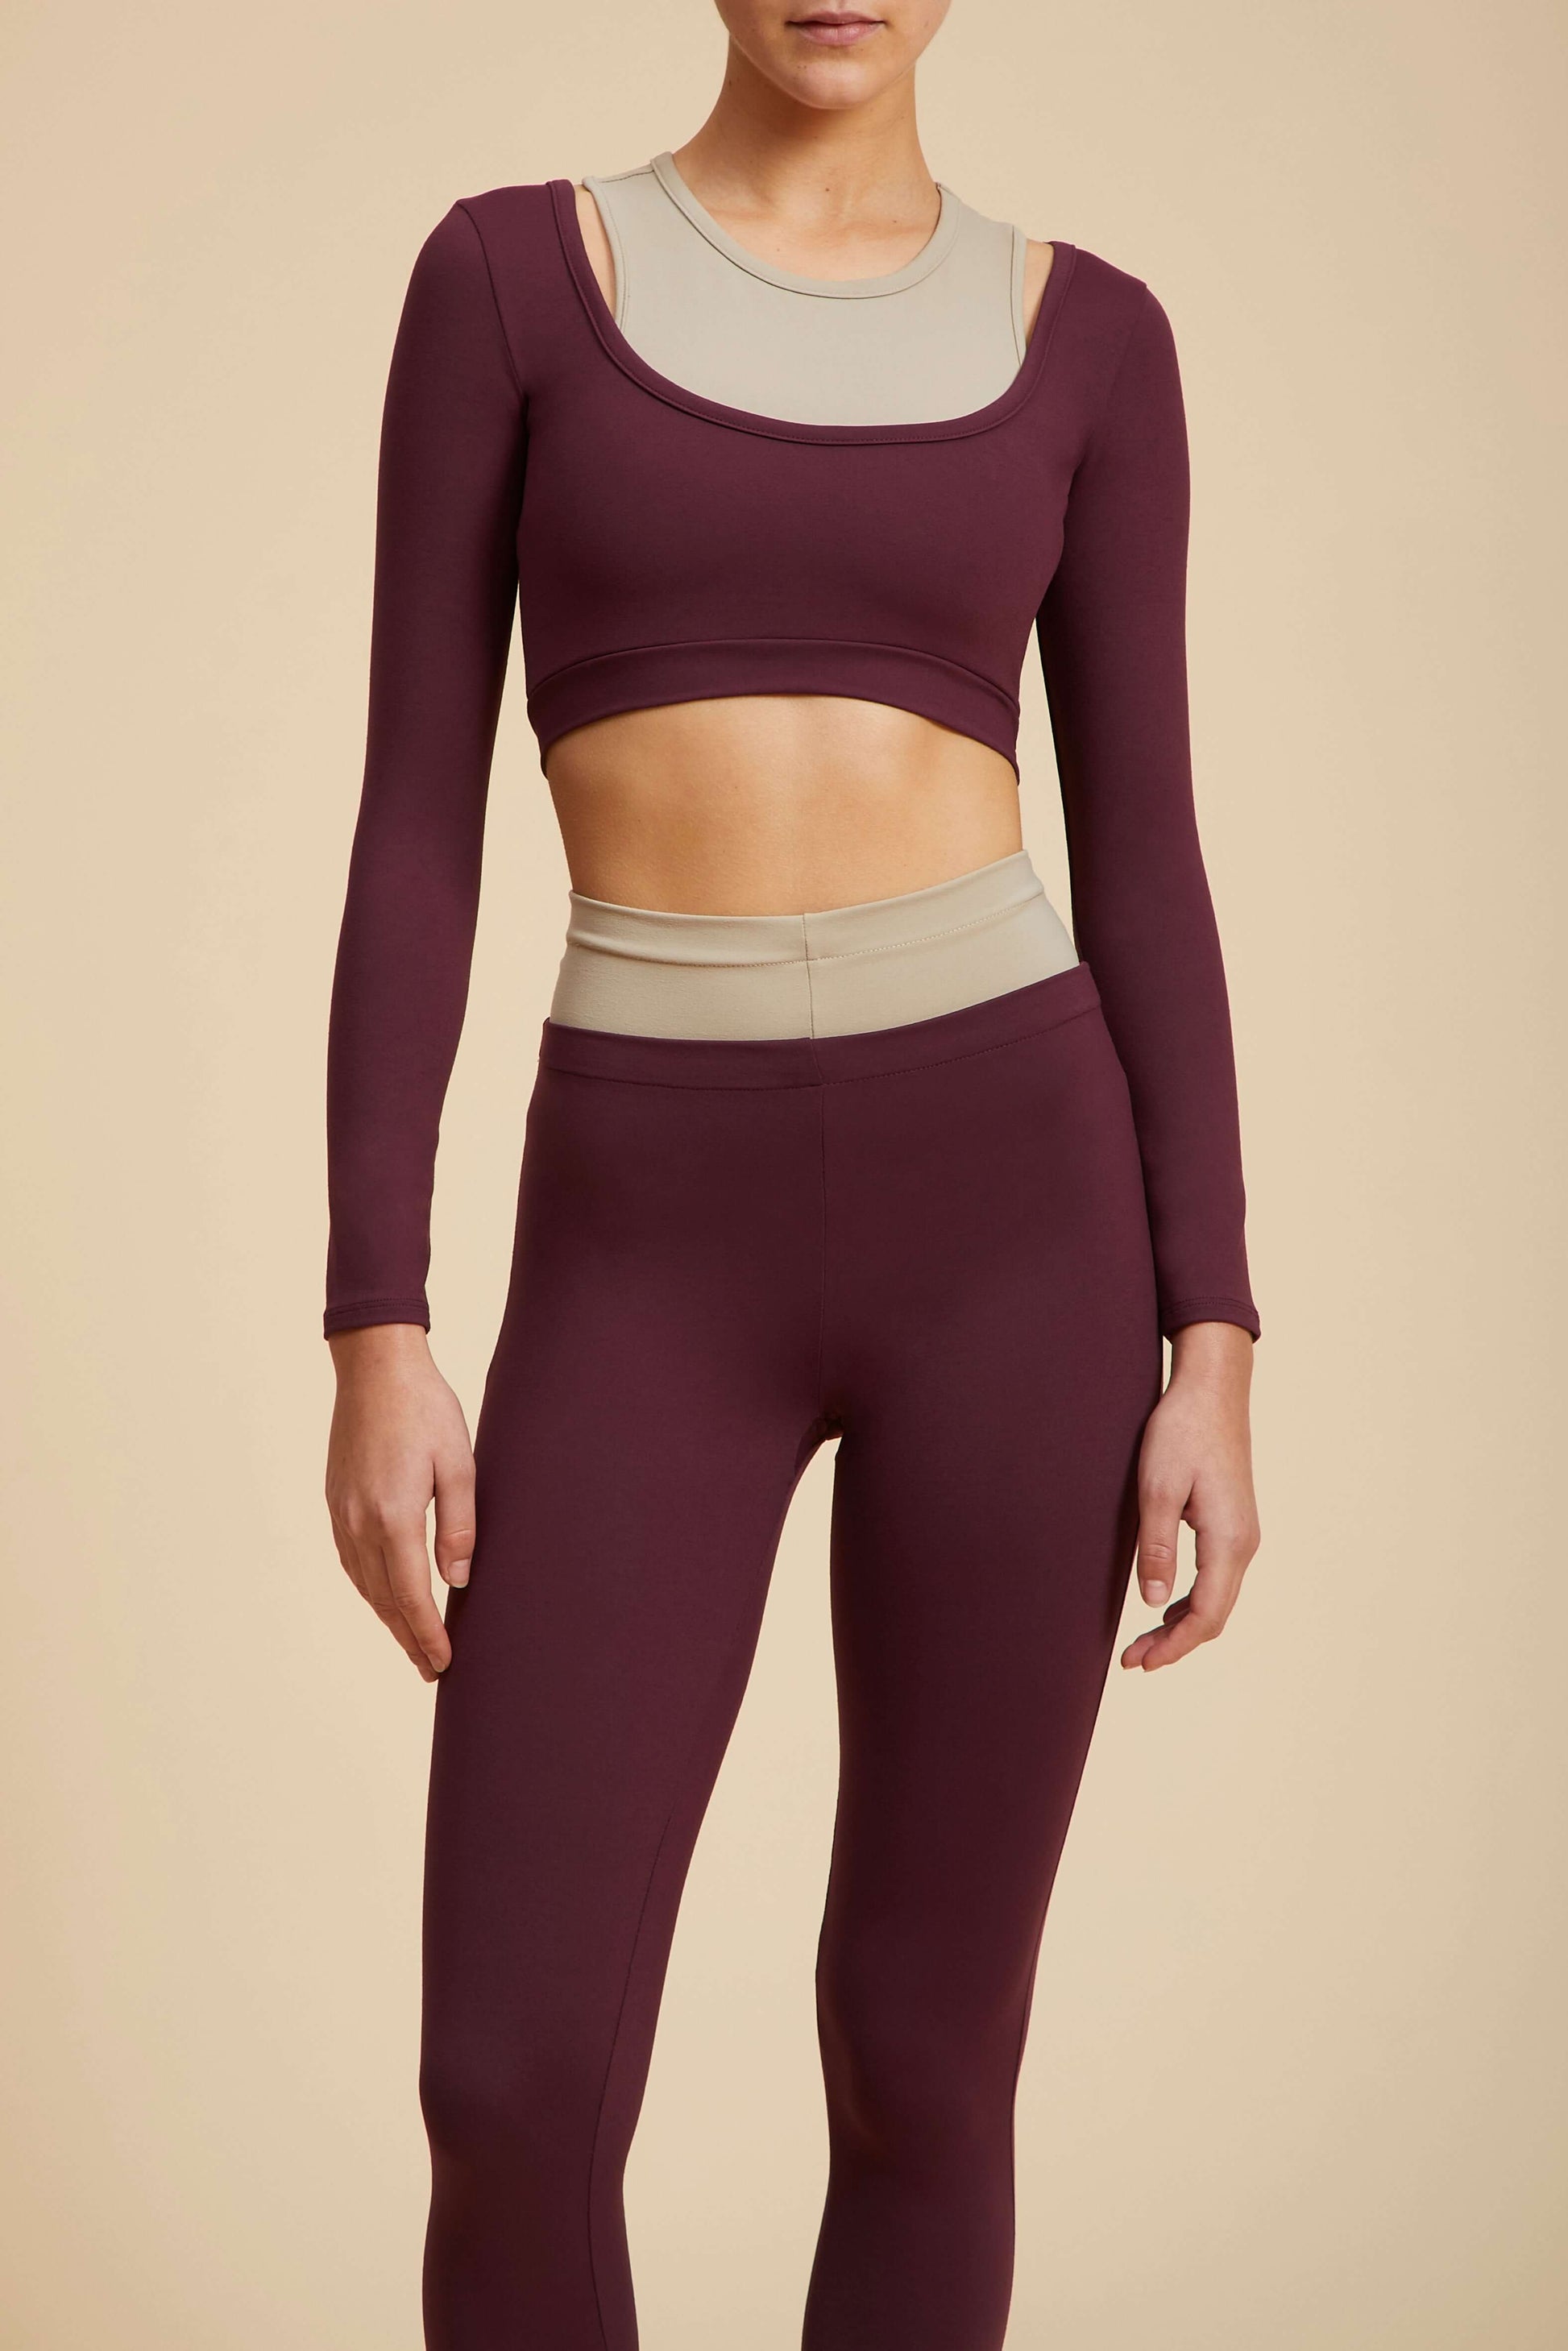 Live The Process Taurus Long Sleeve. March to the beat of your own drum in our sportswear-inspired Taurus Long Sleeve—a striking 2-in-1 in contrasting colors that doesn’t skimp on form or function. This fitted bra top features a wide scoop neck, a cropped